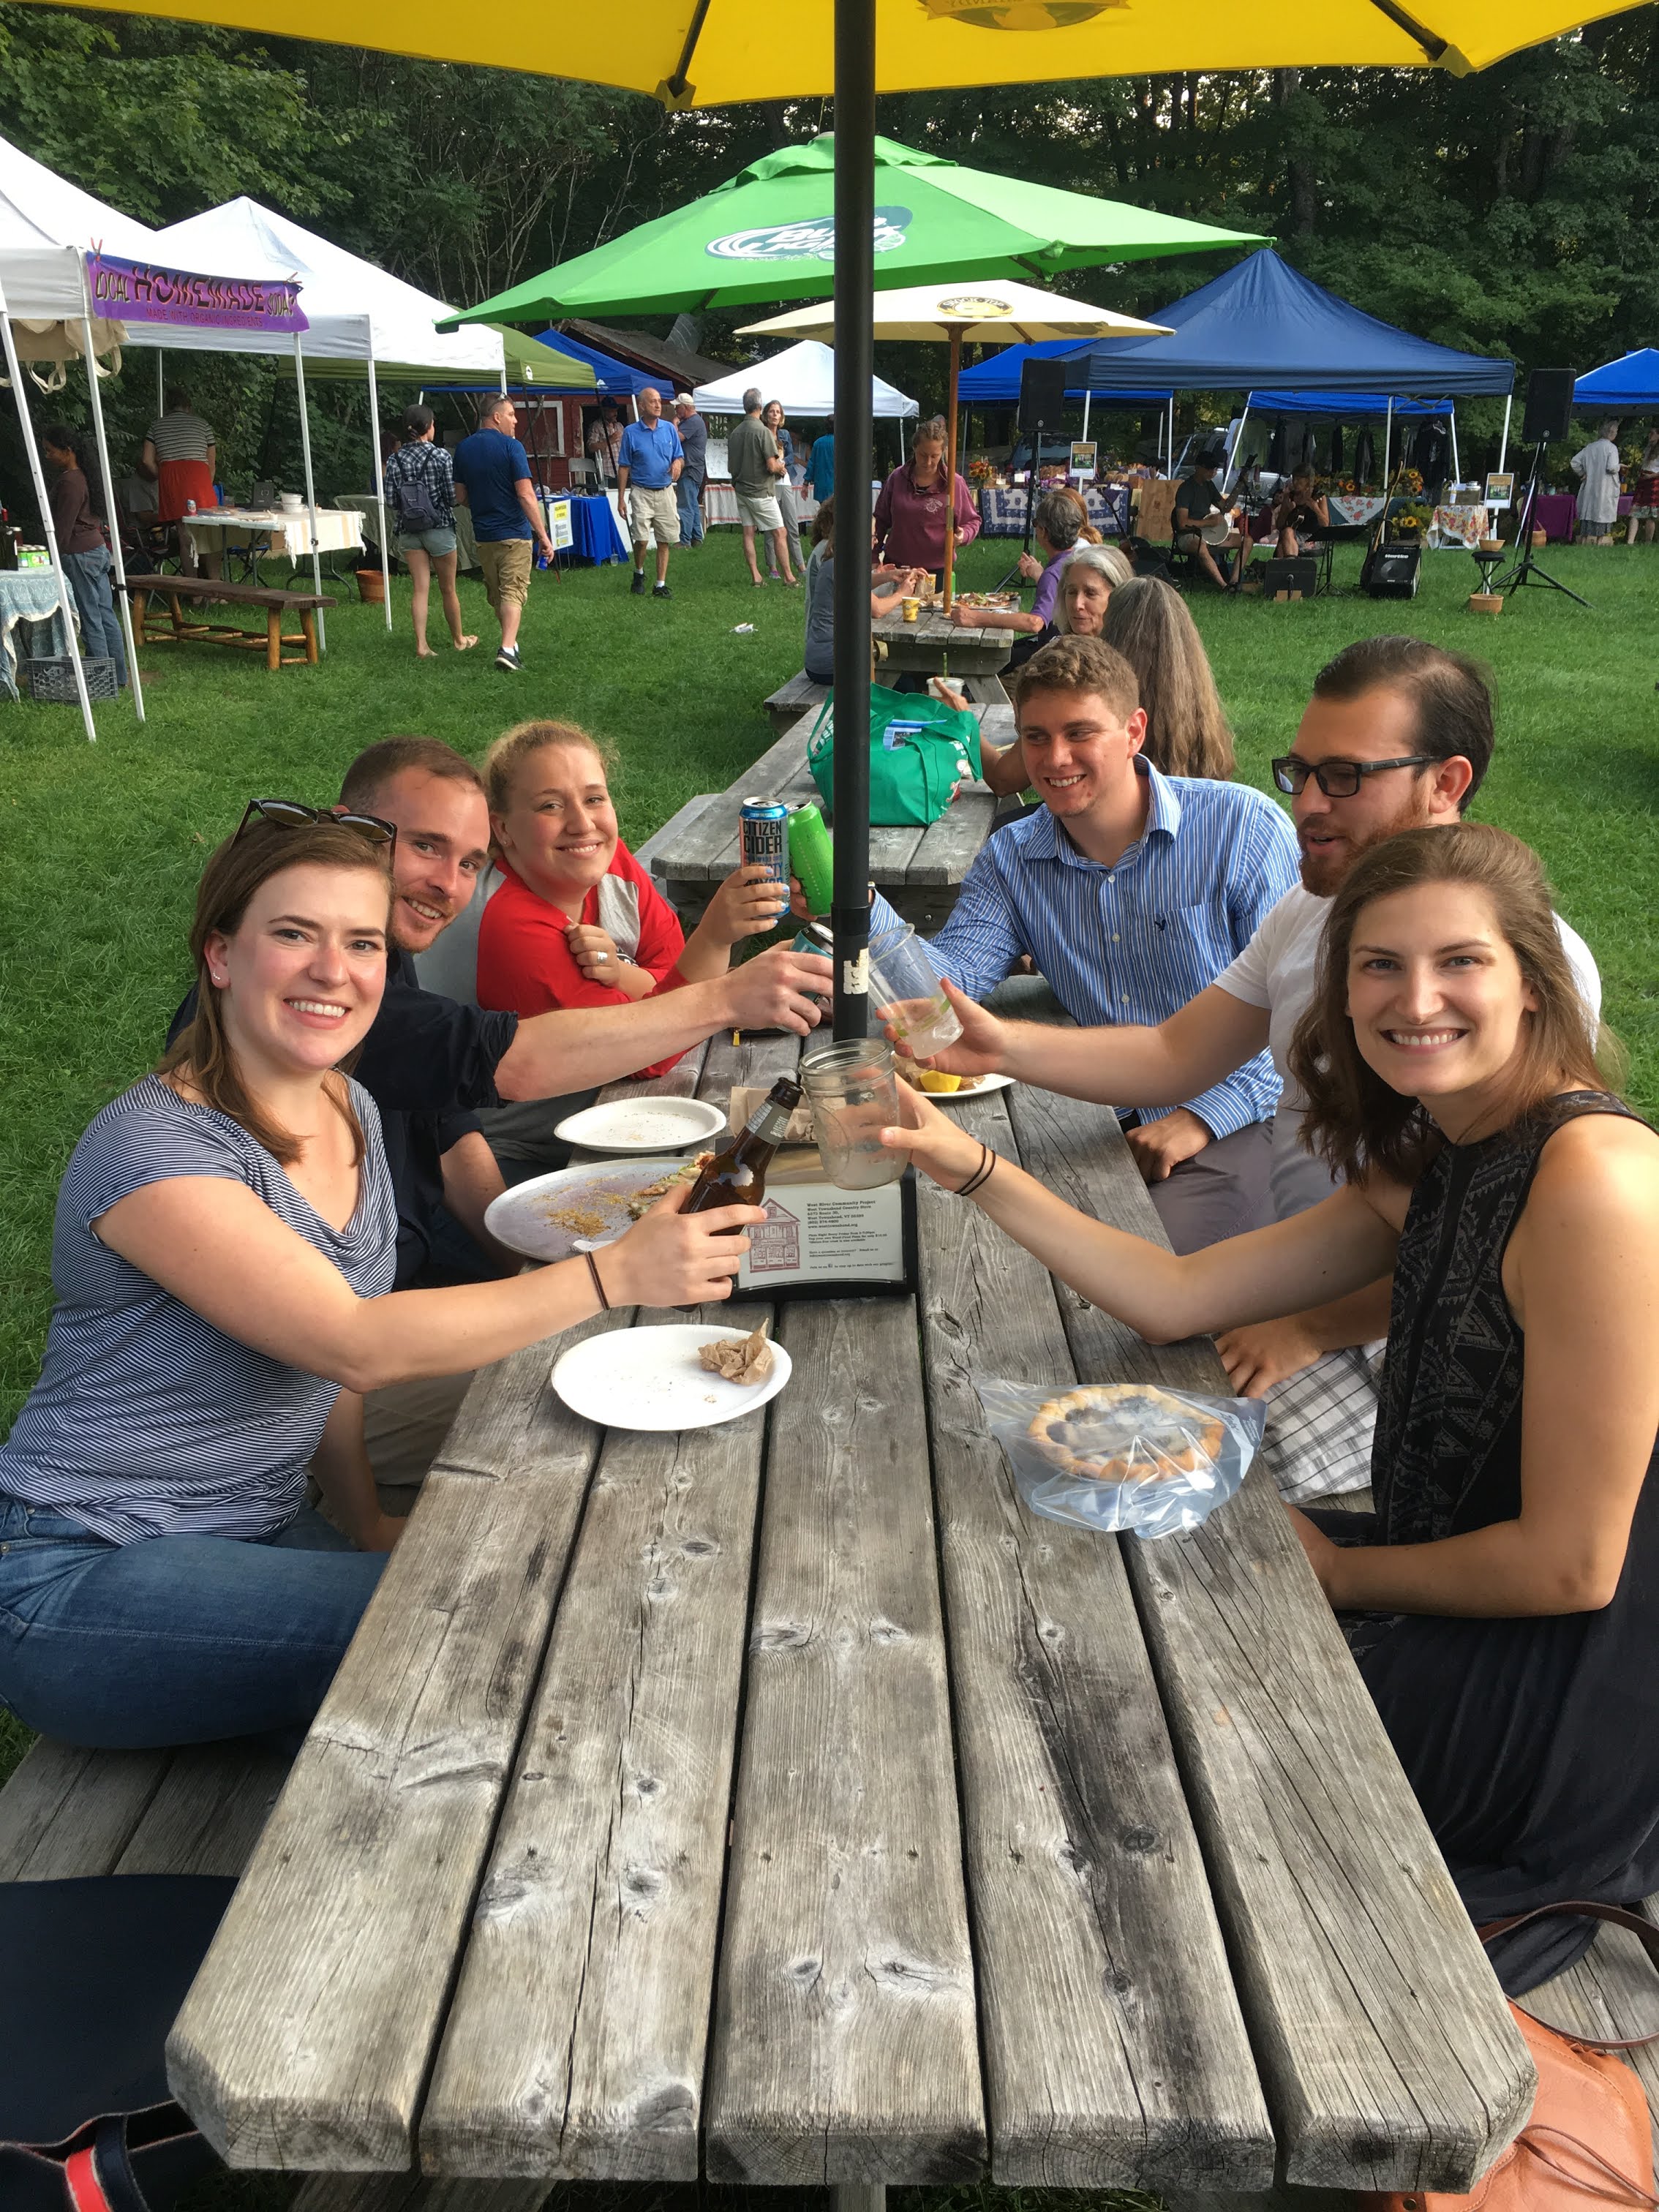 Young Professionals enjoy the community atmosphere at the W. Townshend Country Store Pizza Night